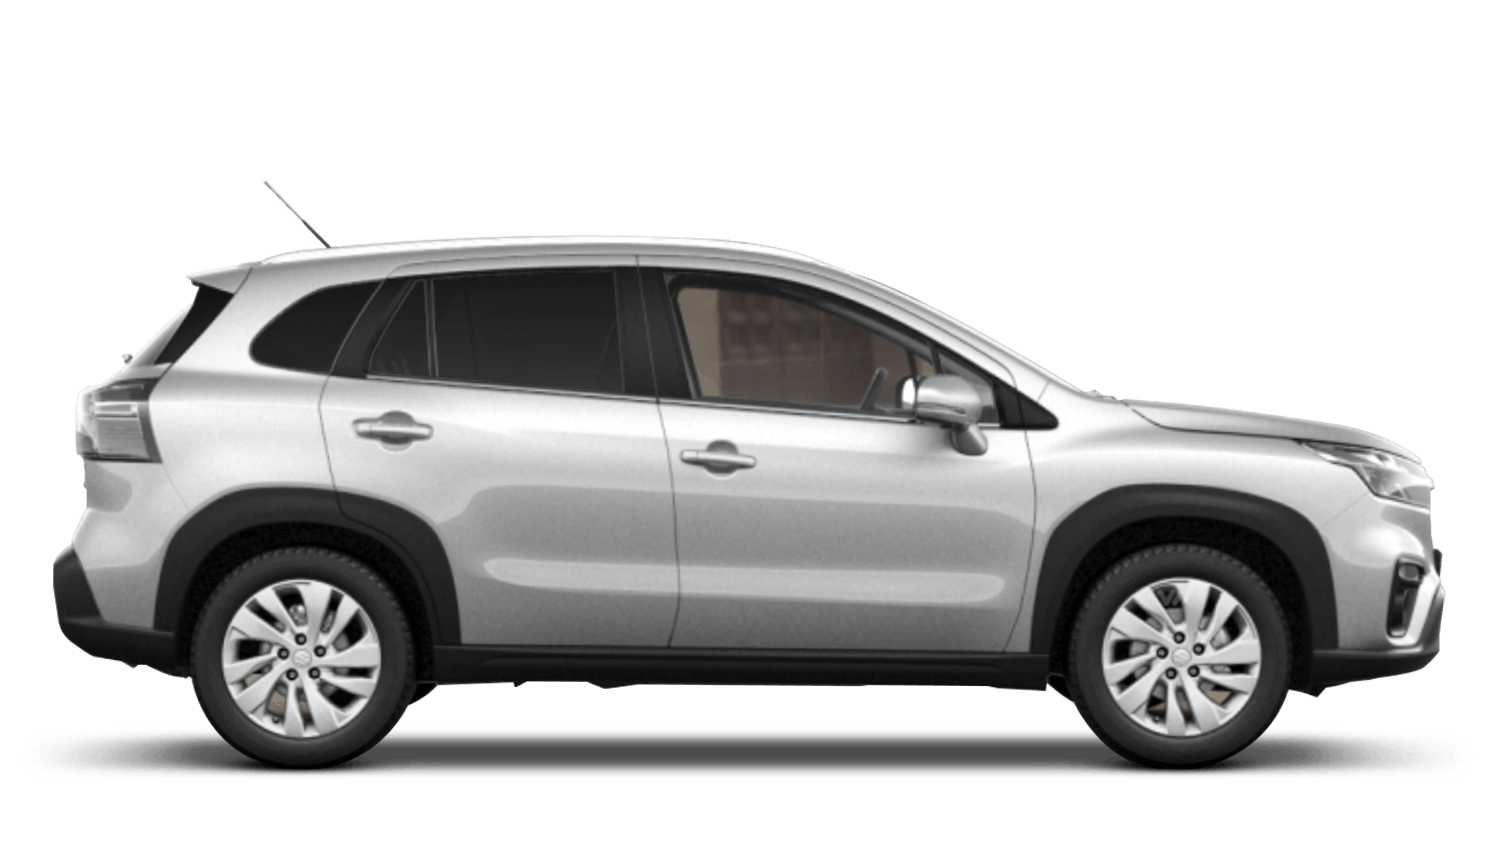 A Brand New S-Cross for only £299 per month?